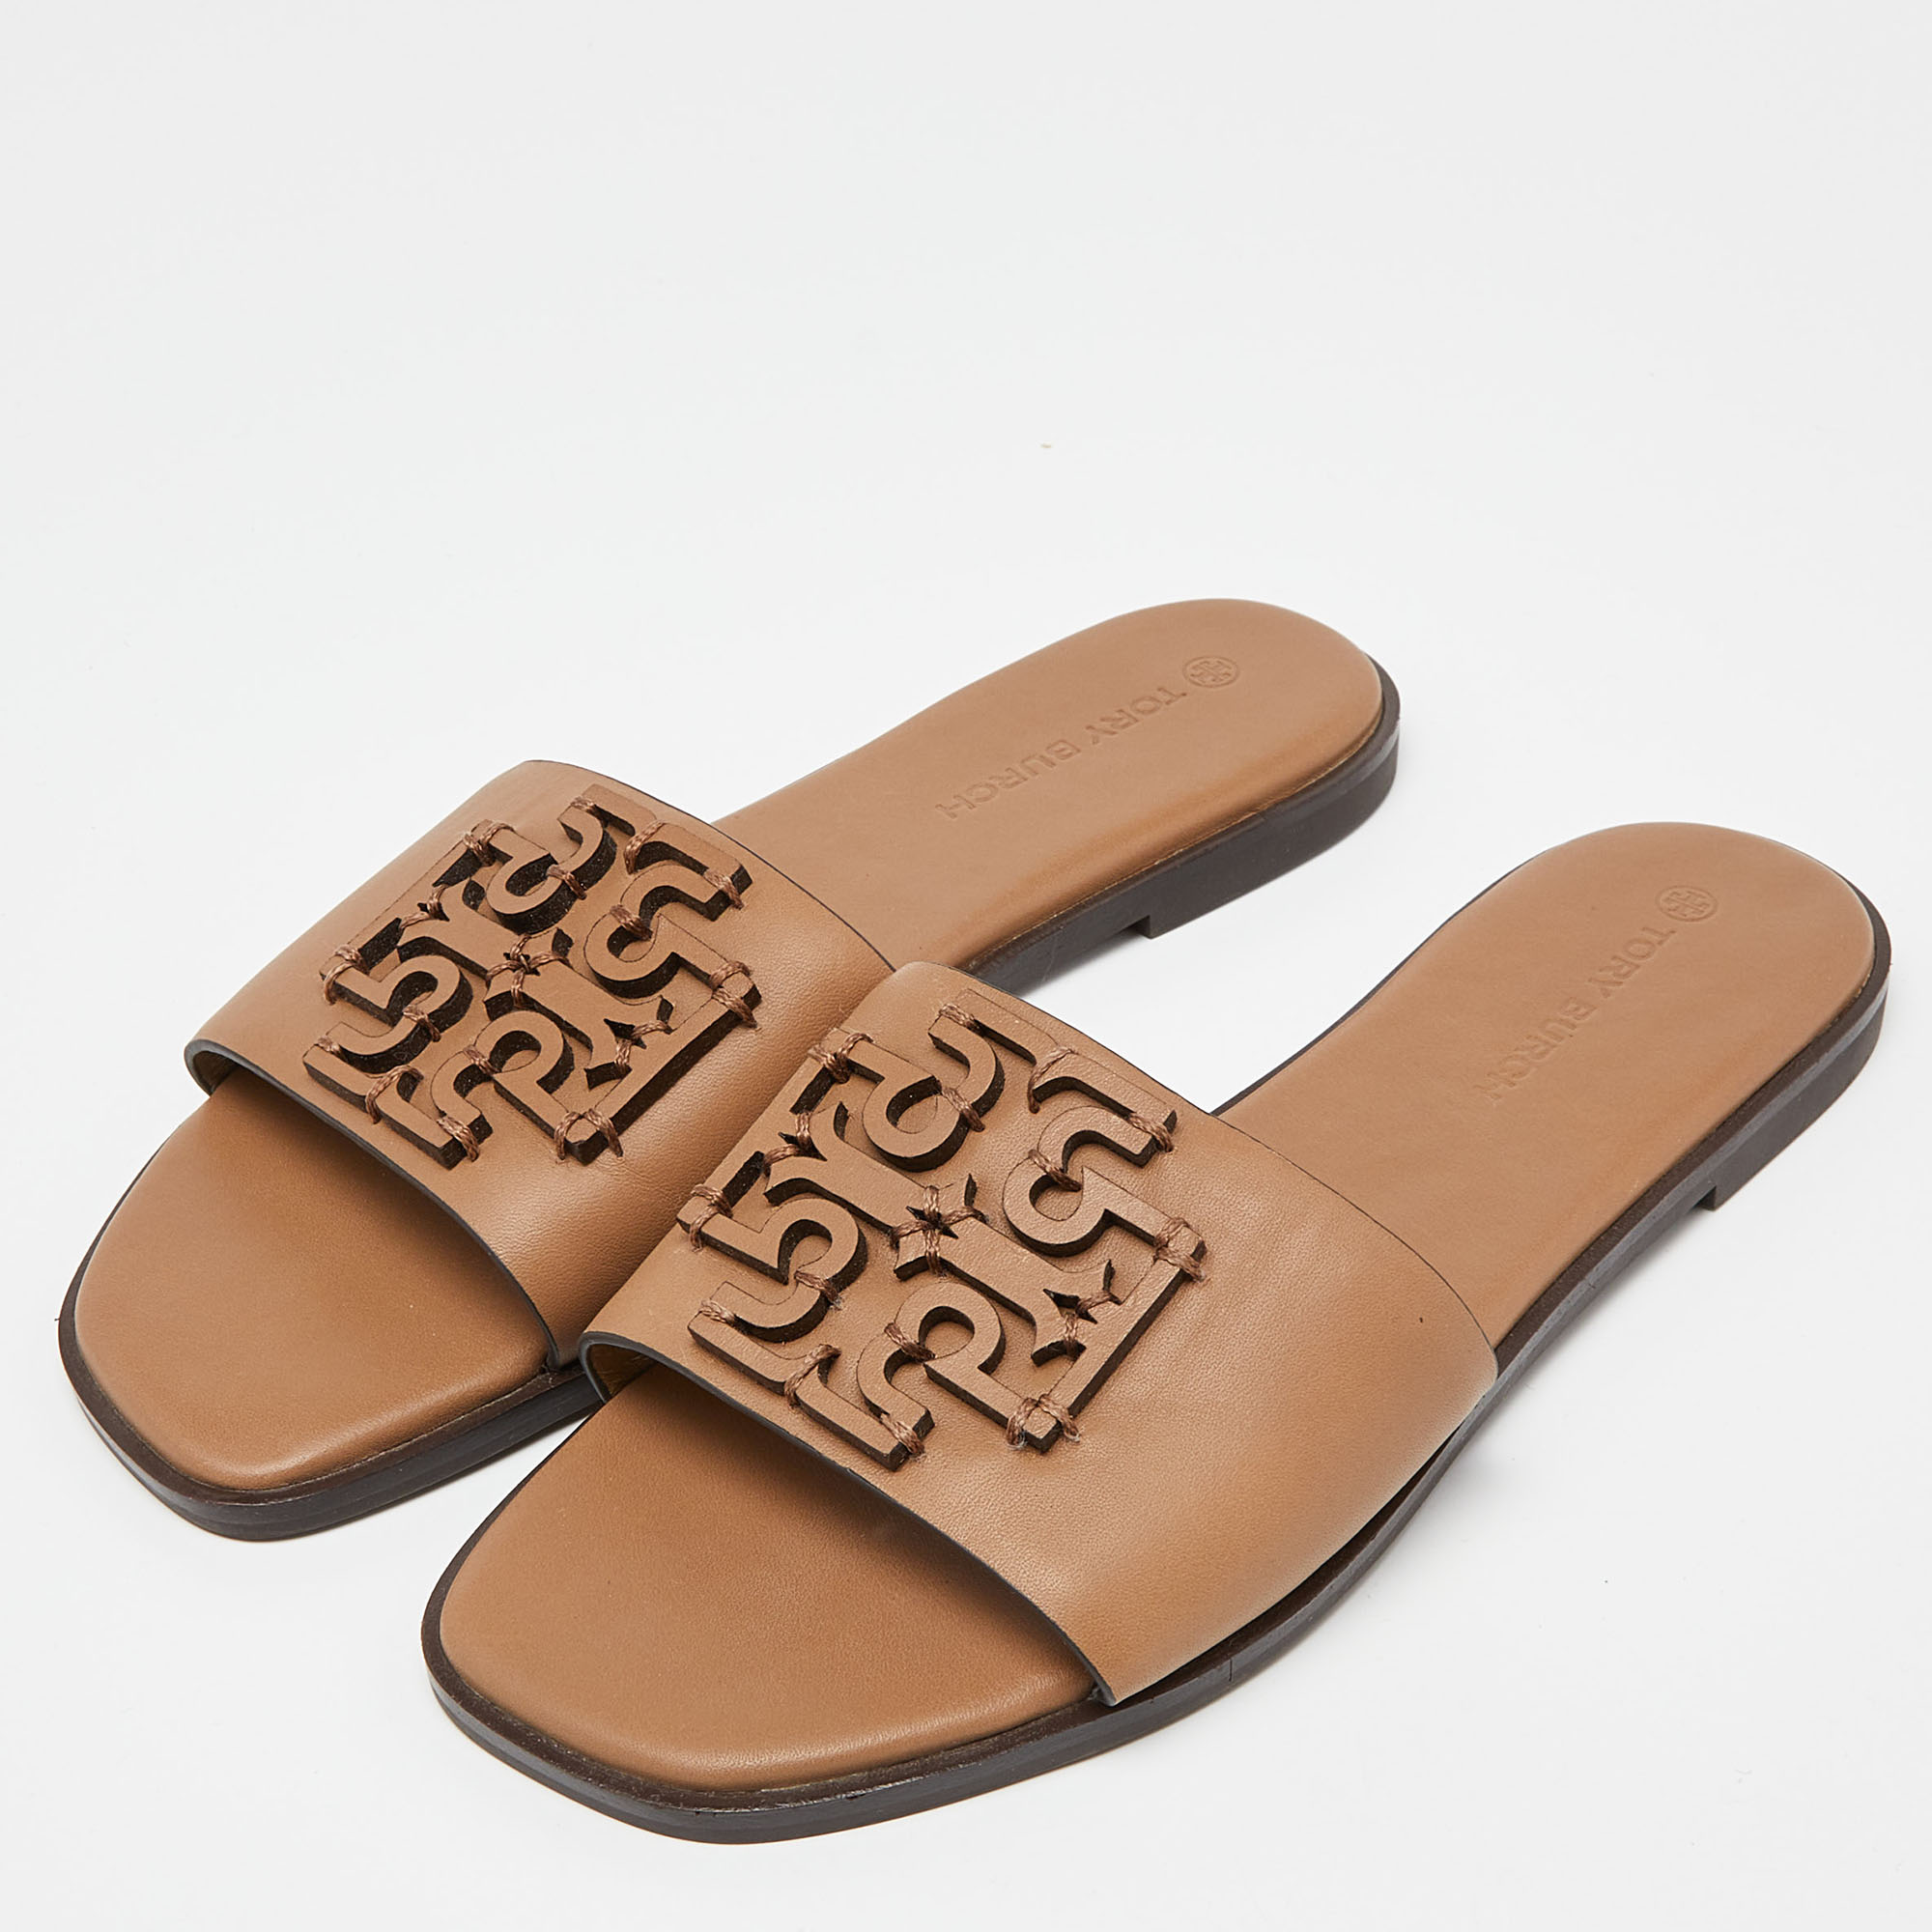 

Tory Burch Beige Leather Ines Slide Sandals Size